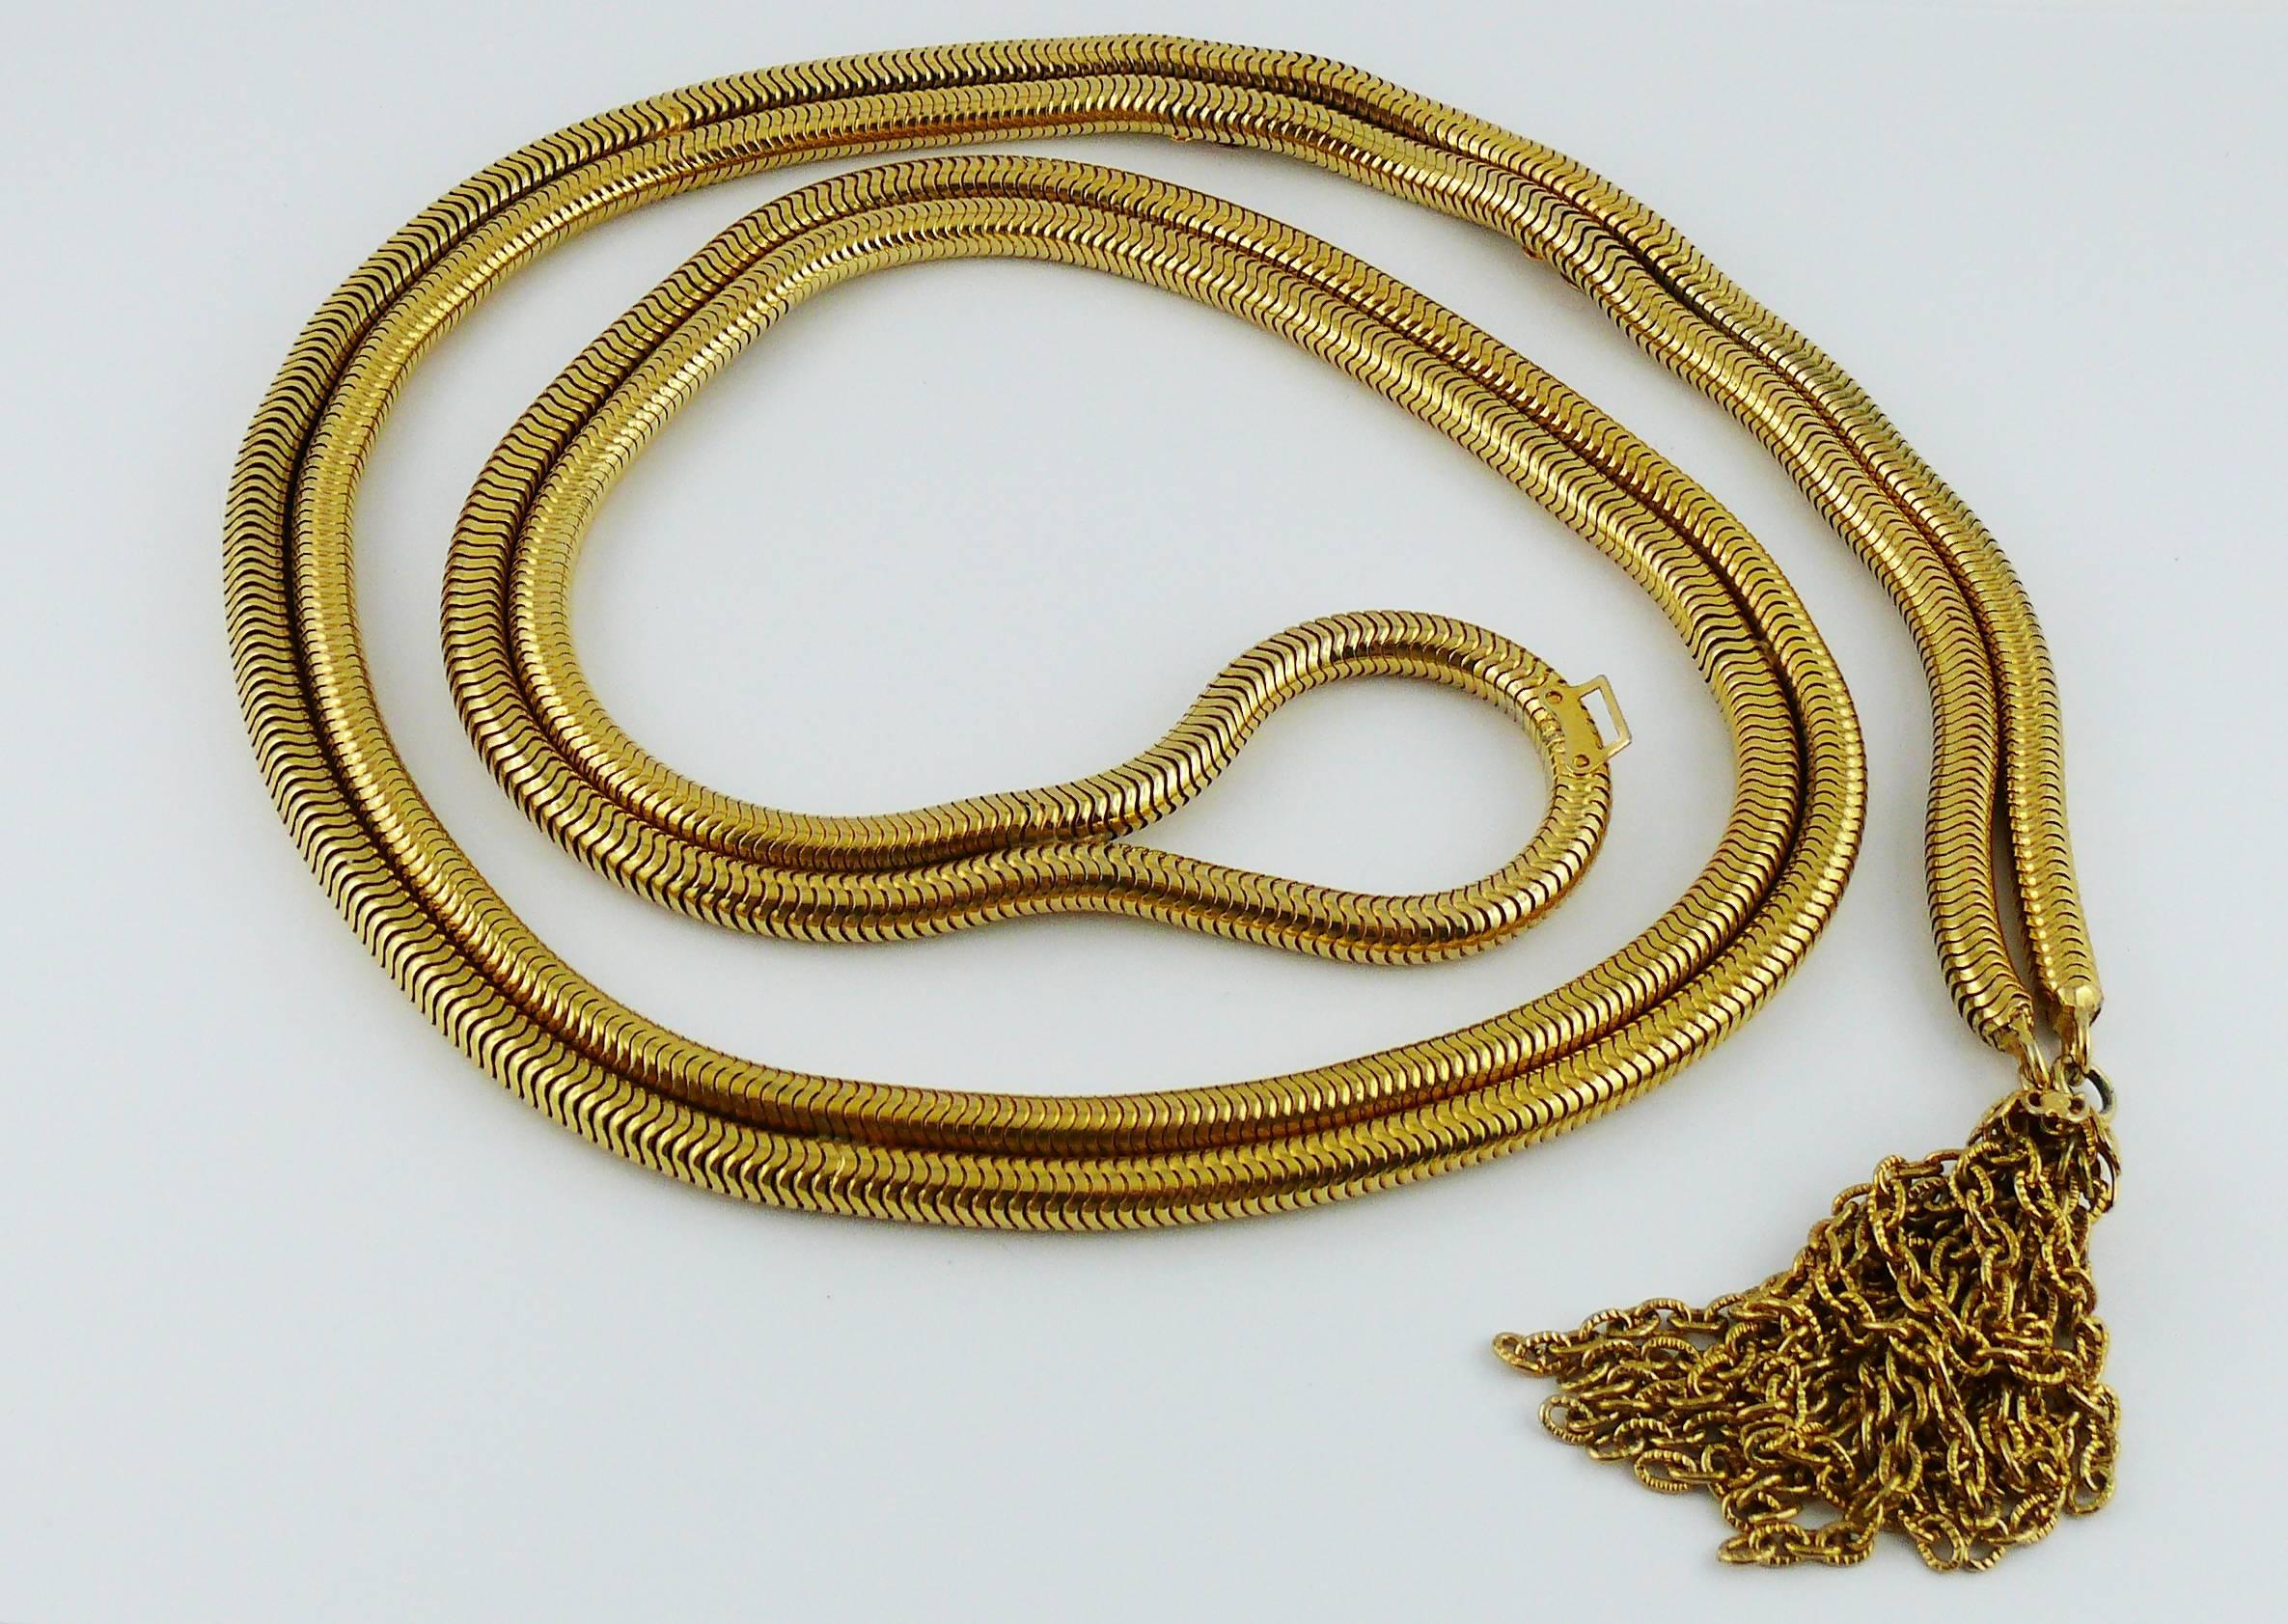 CHRISTIAN DIOR vintage gold toned lariat snake chain belt with tassel.

Hook closure.

Marked CHRISTIAN DIOR.

Indicative measurements : length to 1st hook approx. 70 cm (27.56 inches) / length to 2nd hook approx. 75 cm (29.53 inches) / width